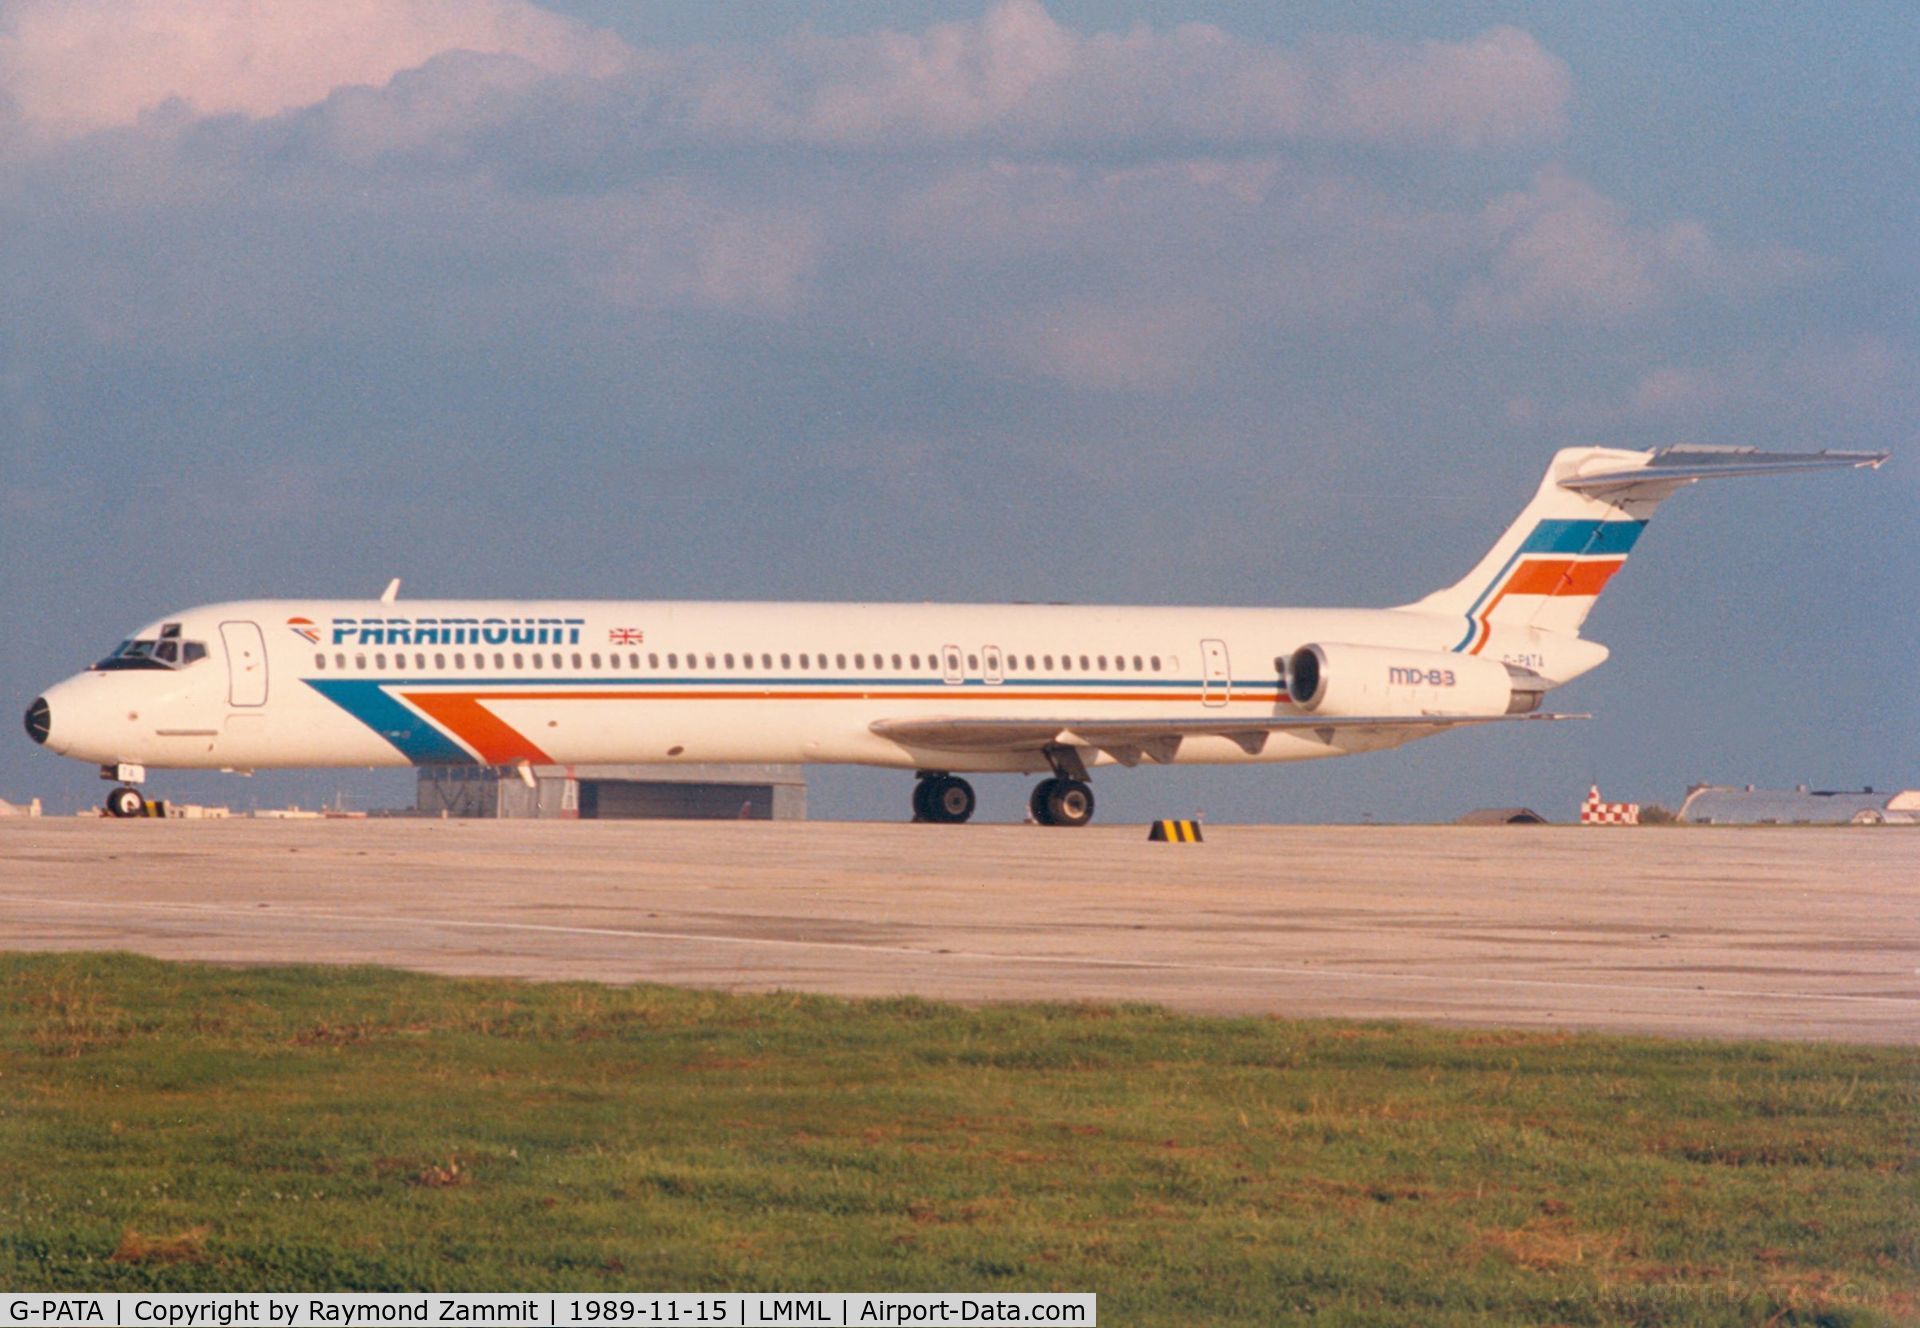 G-PATA, 1986 McDonnell Douglas MD-83 (DC-9-83) C/N 49398, McDonnell Douglas MD-83 G-PATA Paramount Airlines